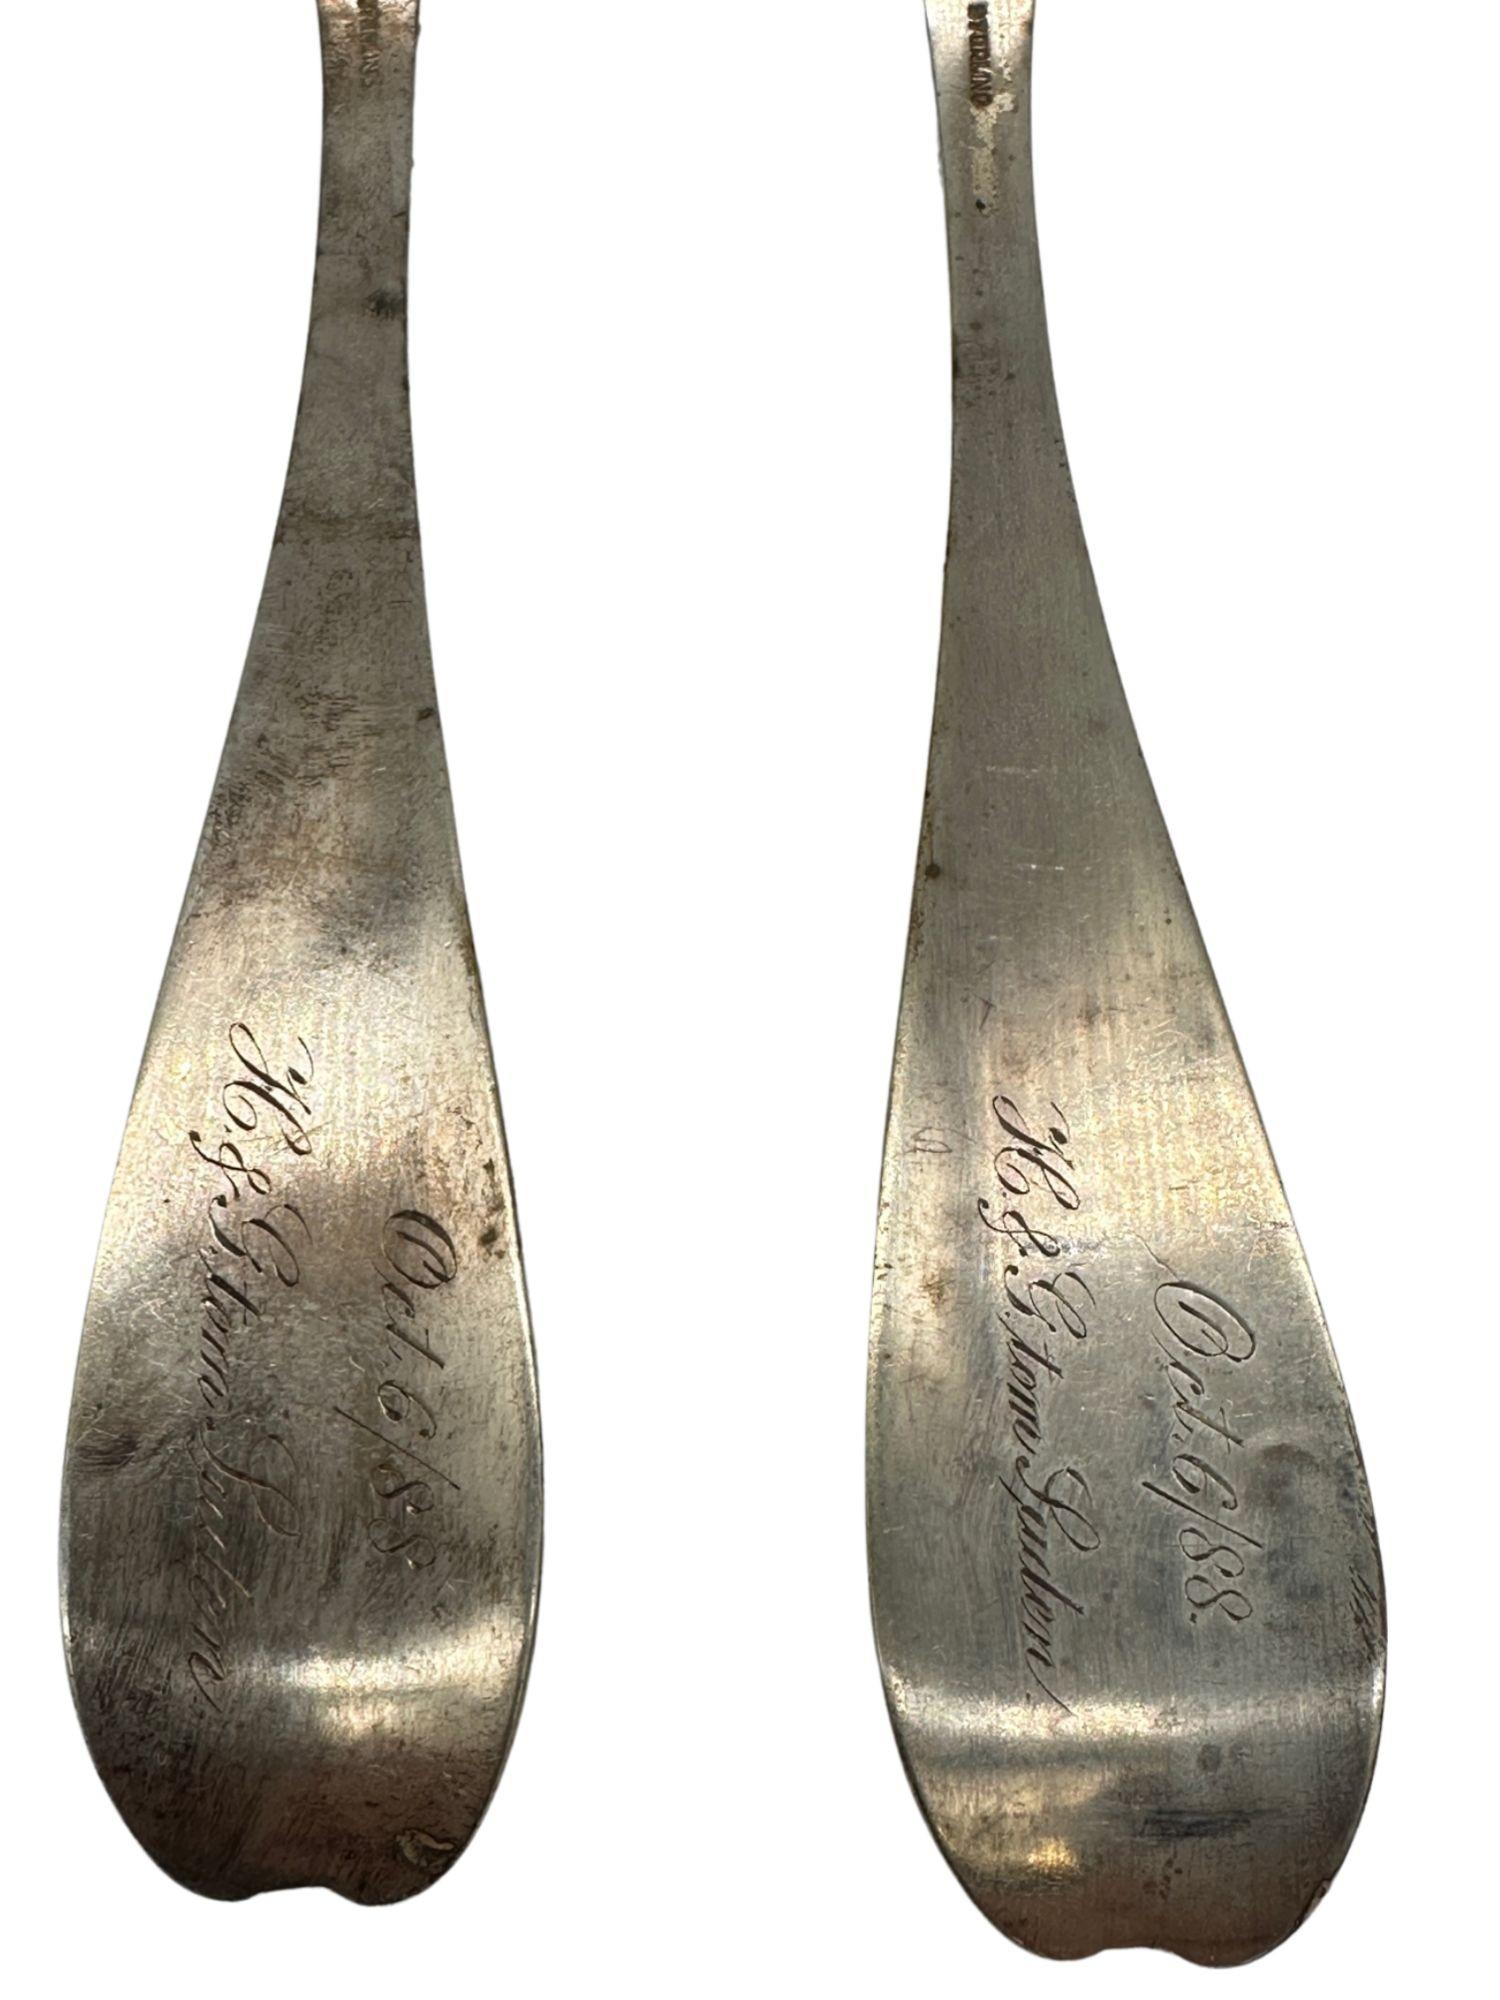 J D & S M Knowles Co Sterling Silver Serving Spoon Aeolian Pattern, 1882 In Excellent Condition For Sale In Van Nuys, CA